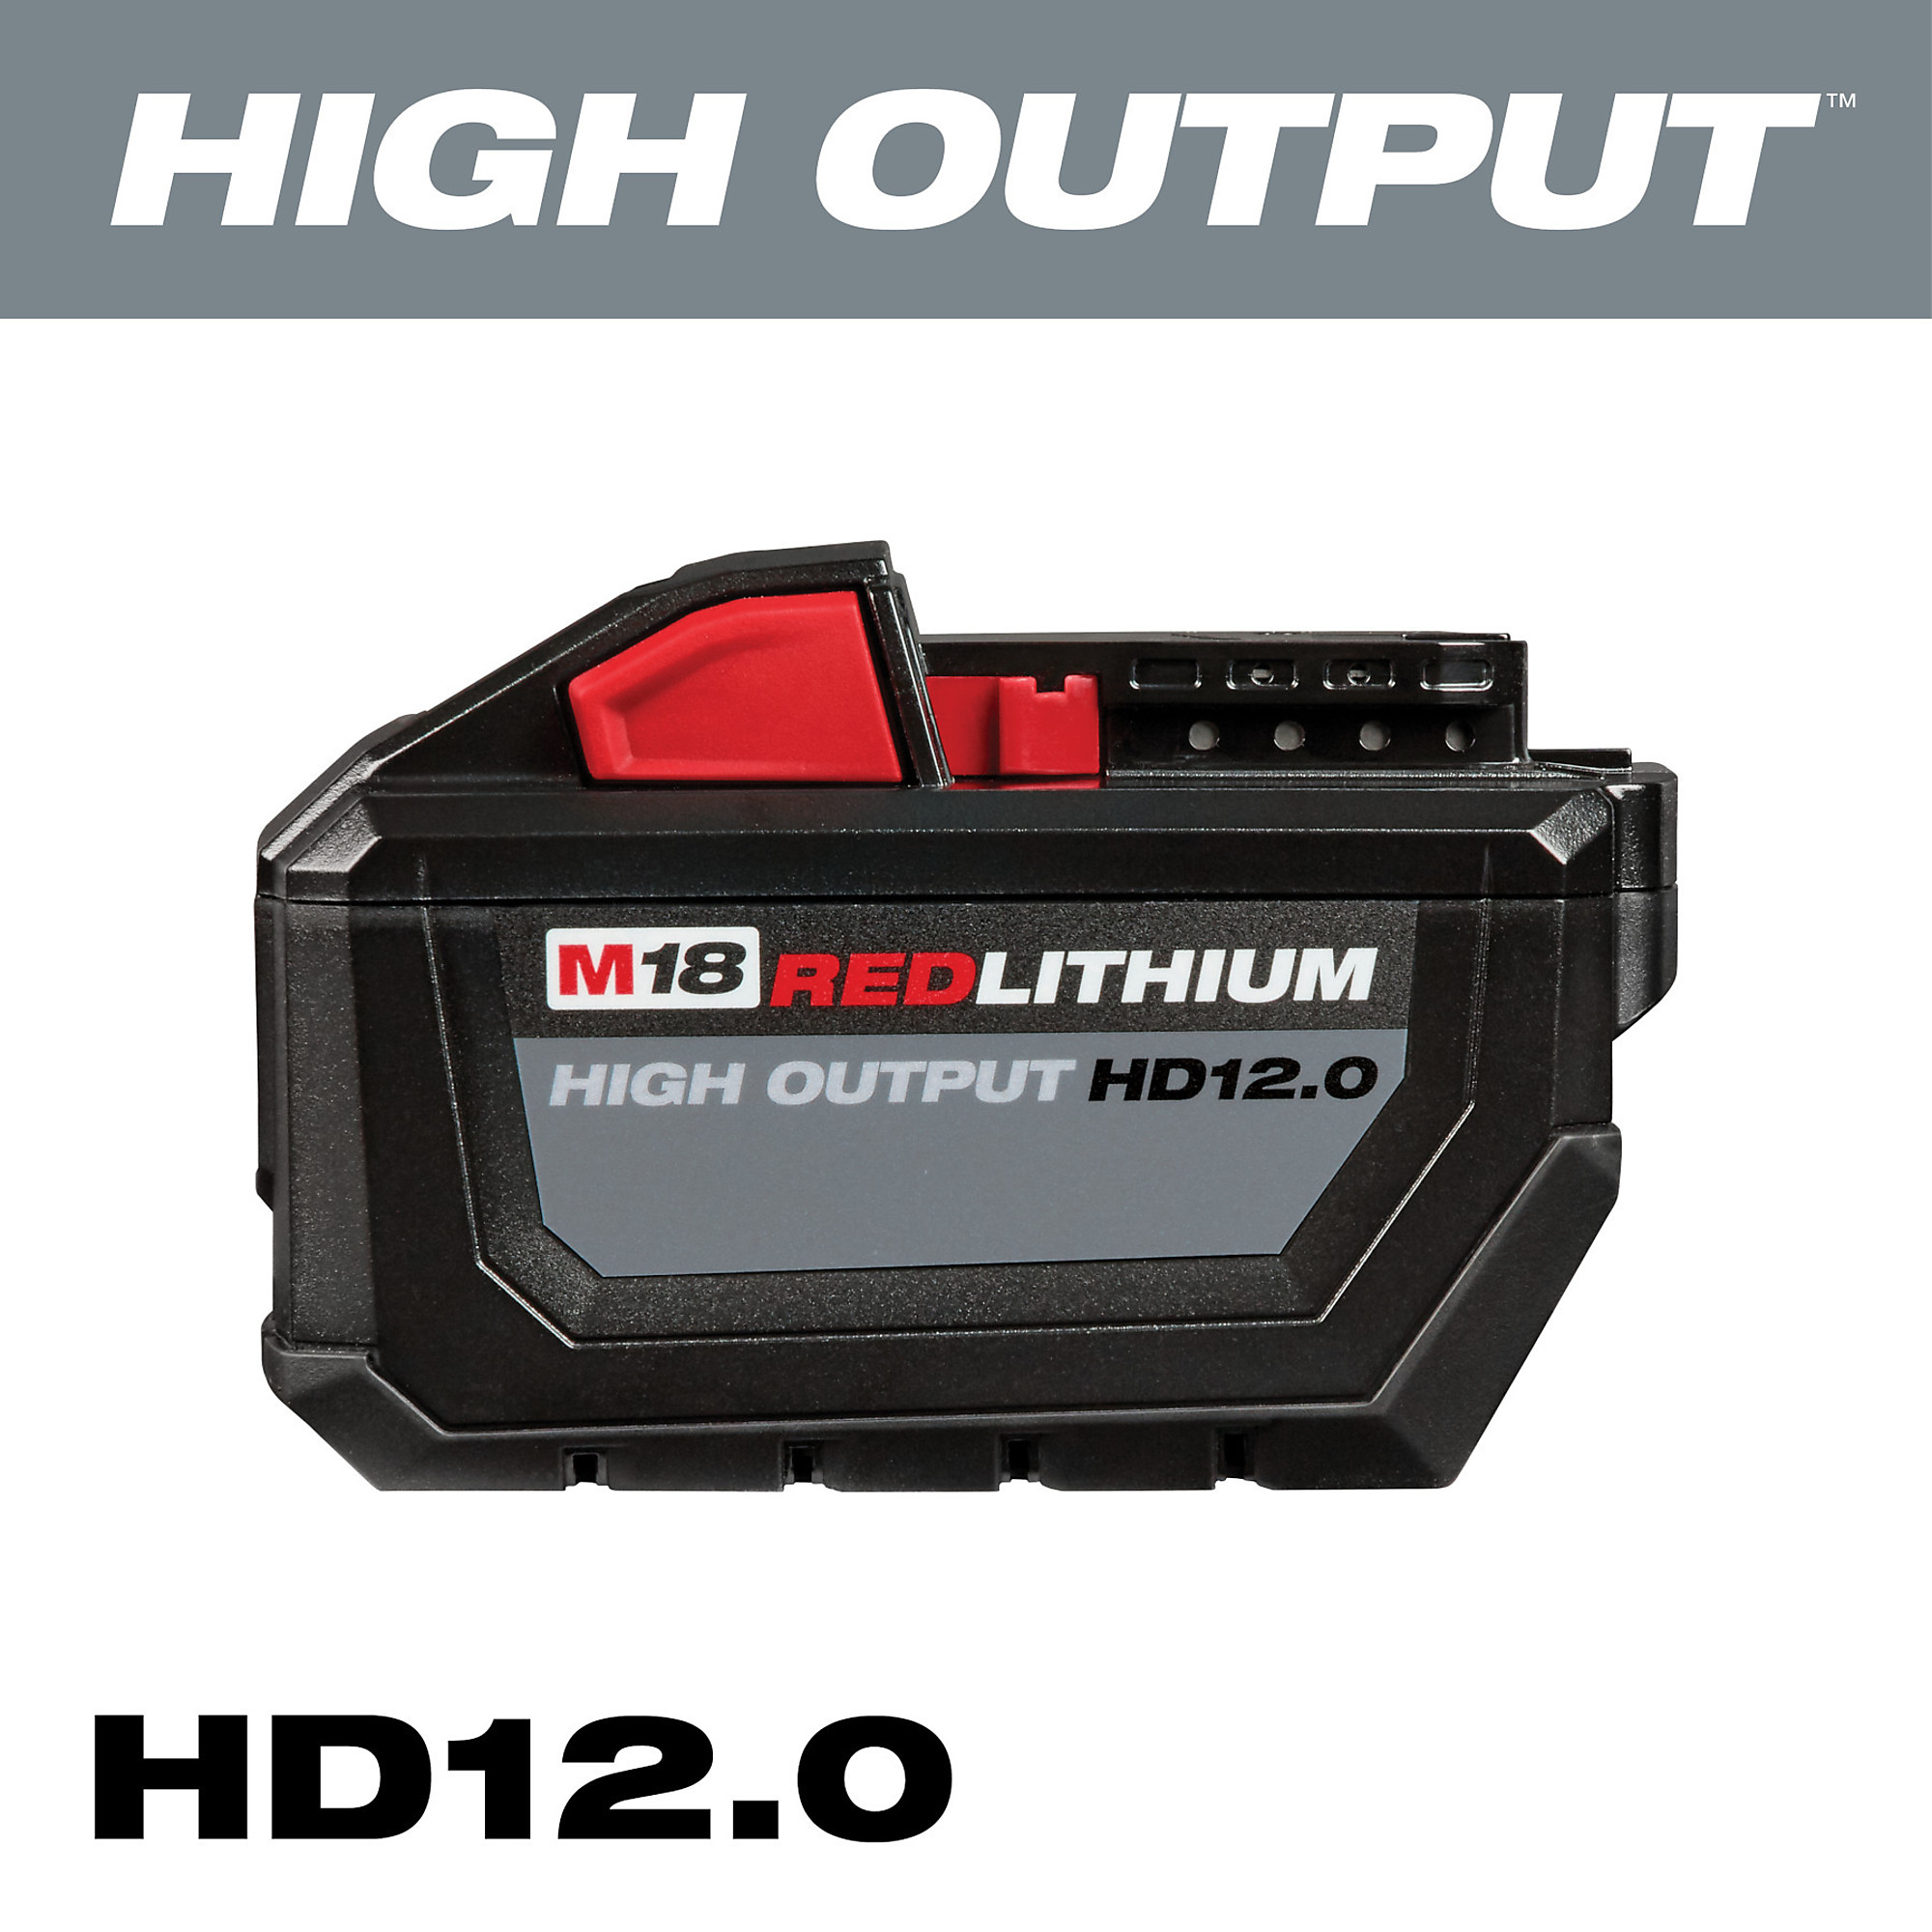 Milwaukee M18 REDLITHIUM High Output HD12.0 Battery Pack, 12Ah, Model 48-11-1812